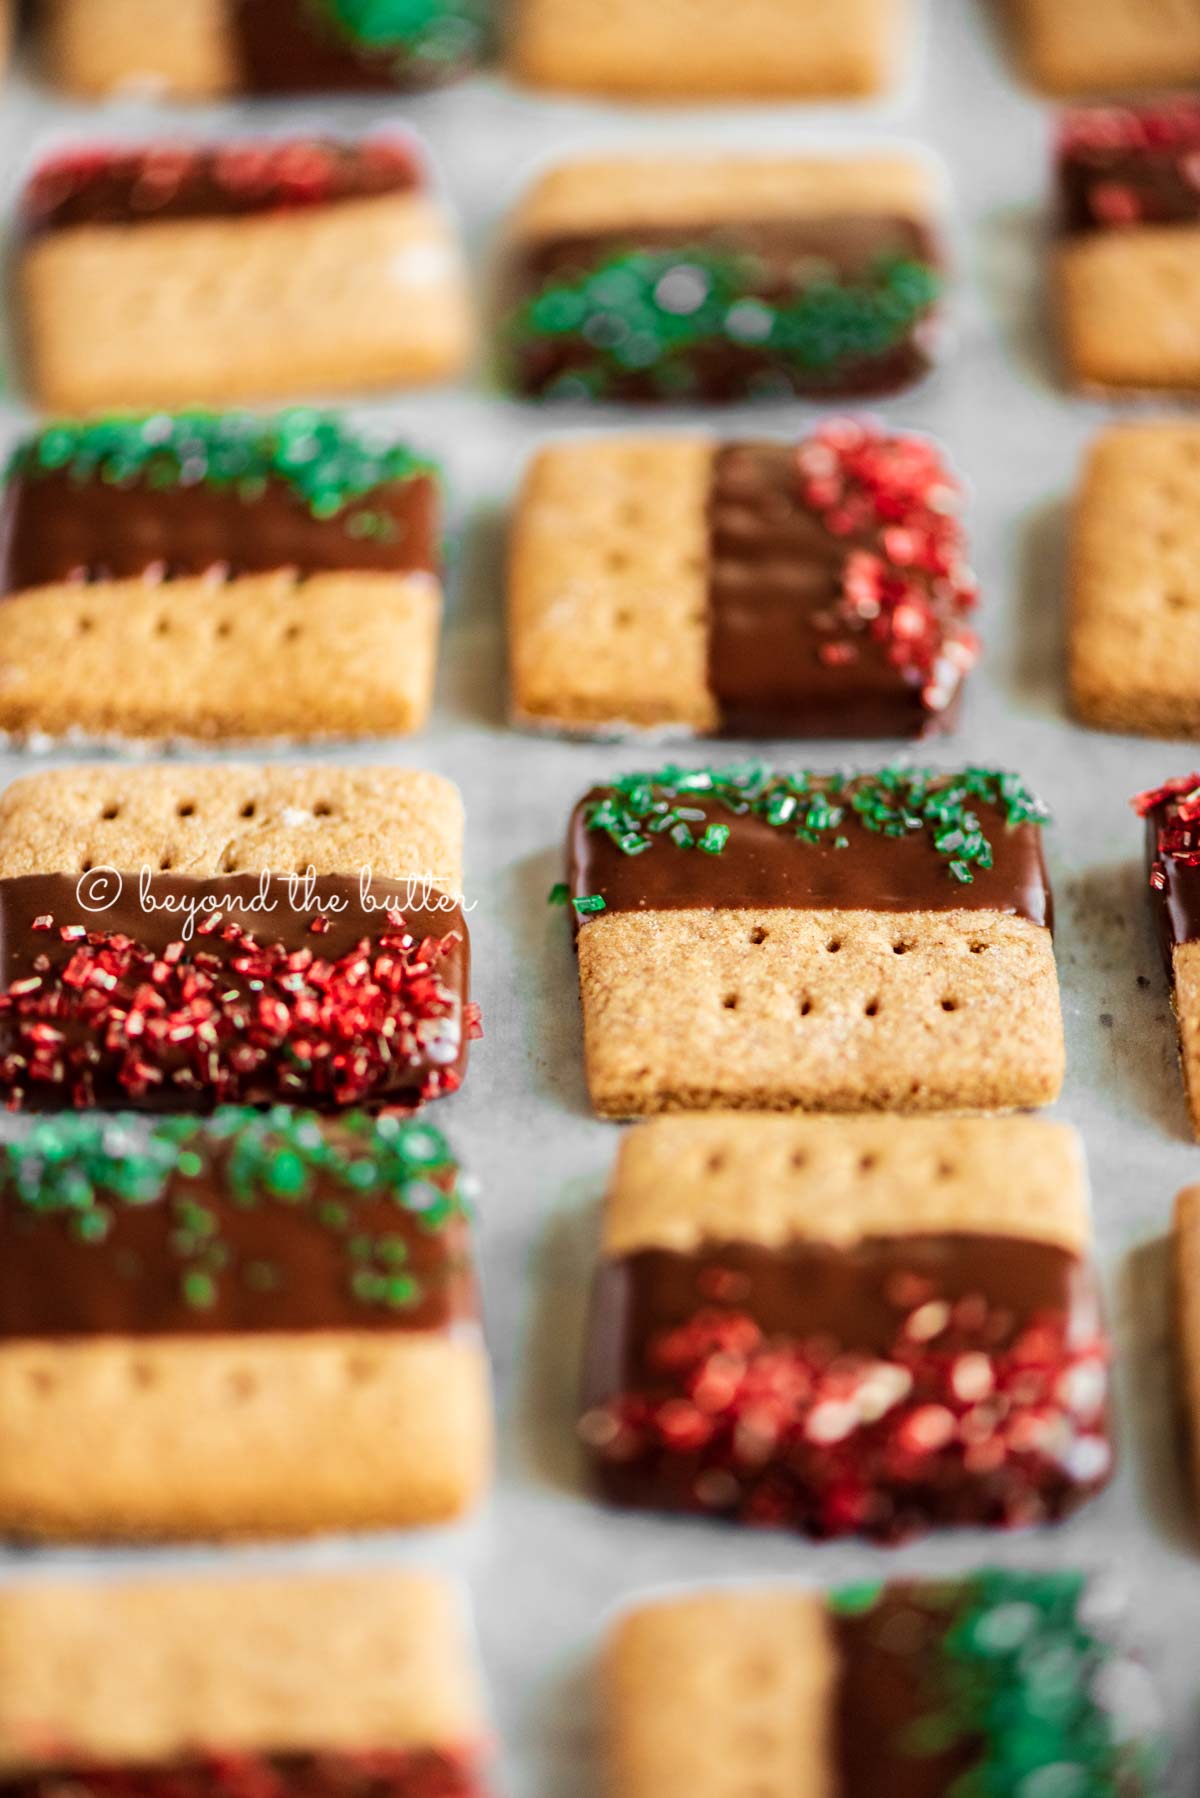 Image of Chocolate Dipped Graham Cracker Sqaures on a cookie sheet | © Beyond the Butter®